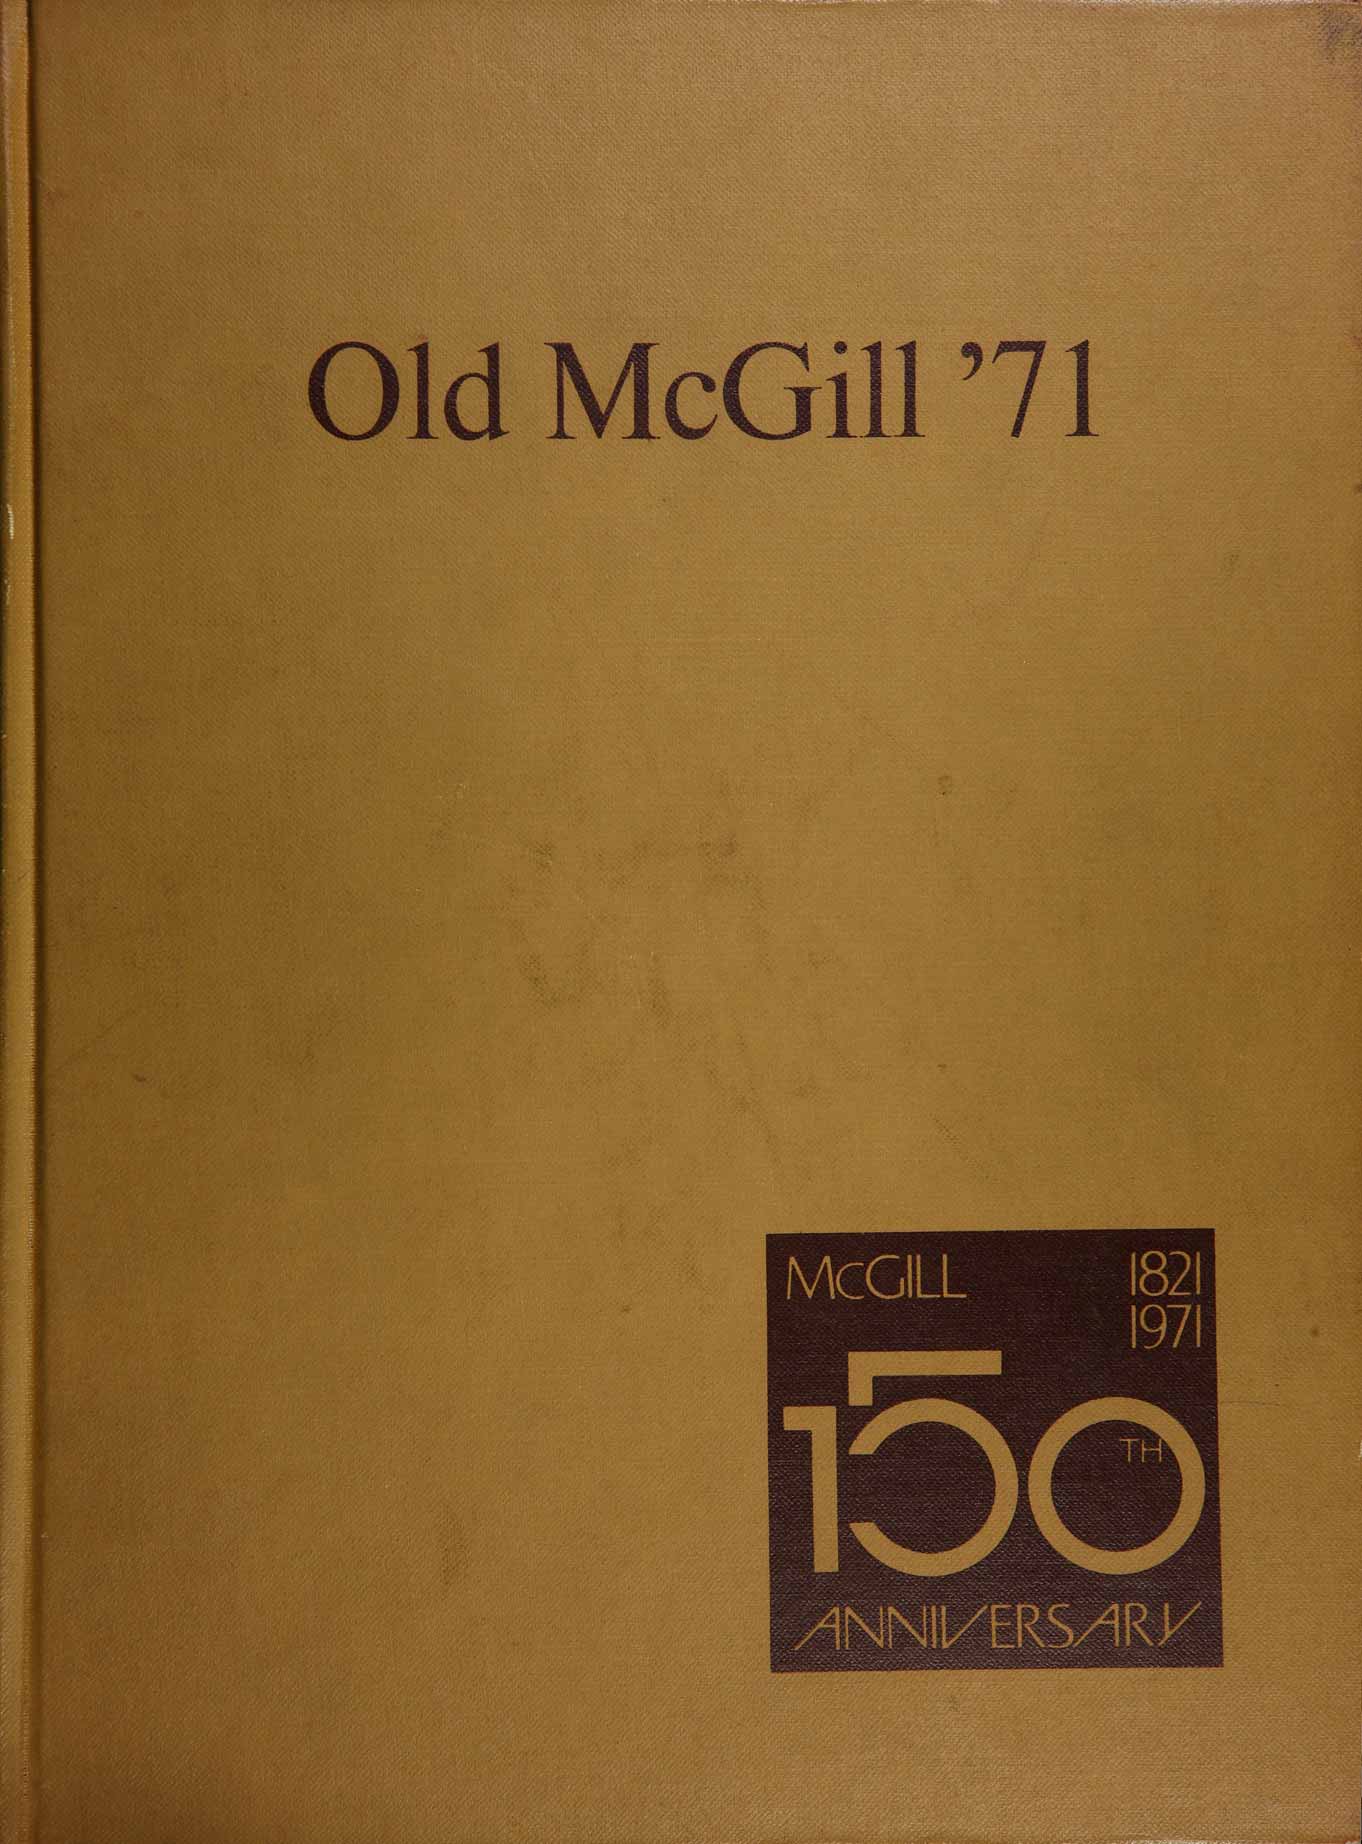 McGill Yearbook: 1971